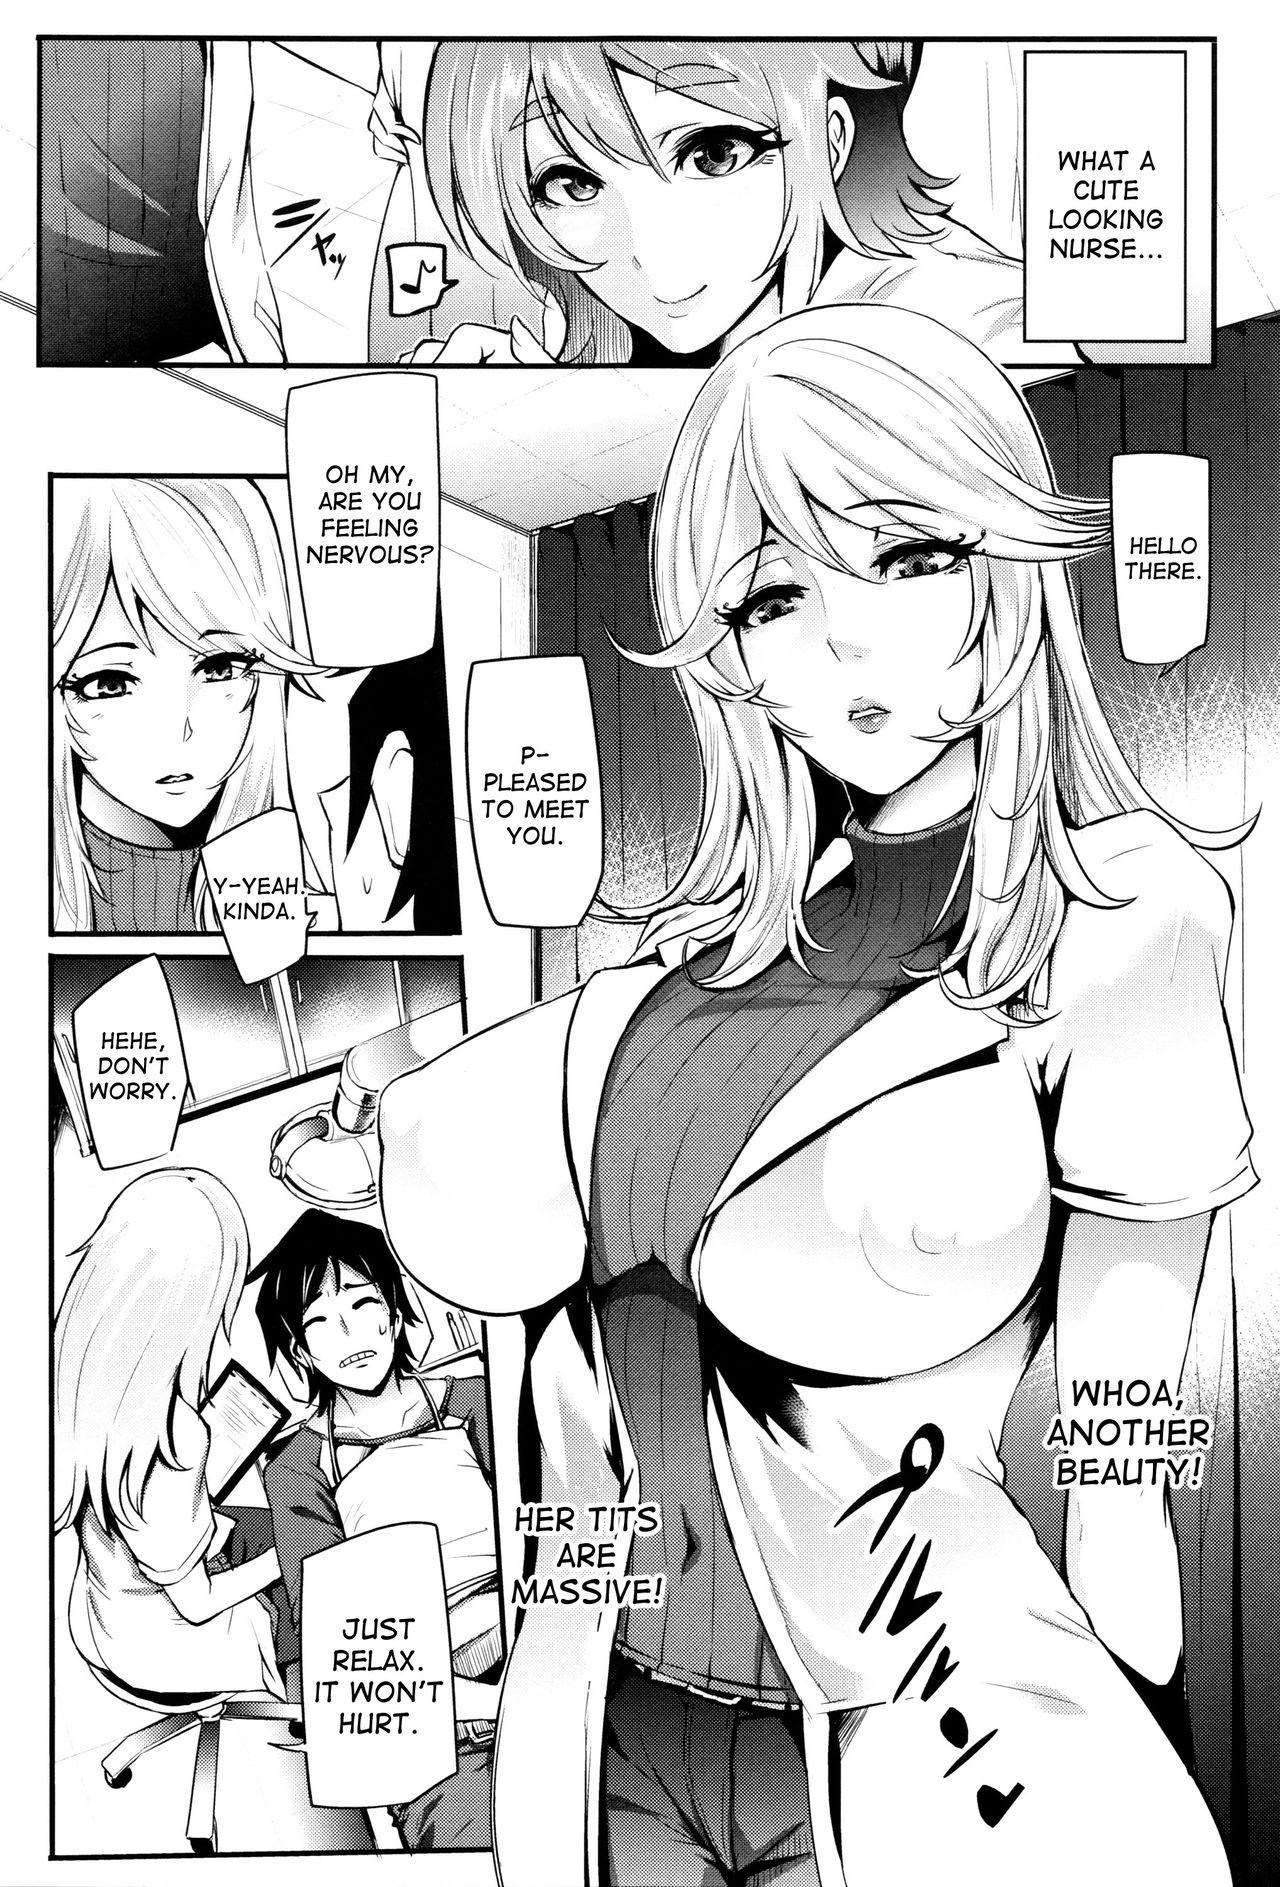 Pussysex Inyoku "Cli"nic | Lewd Desire Clitnic Sixtynine - Page 3